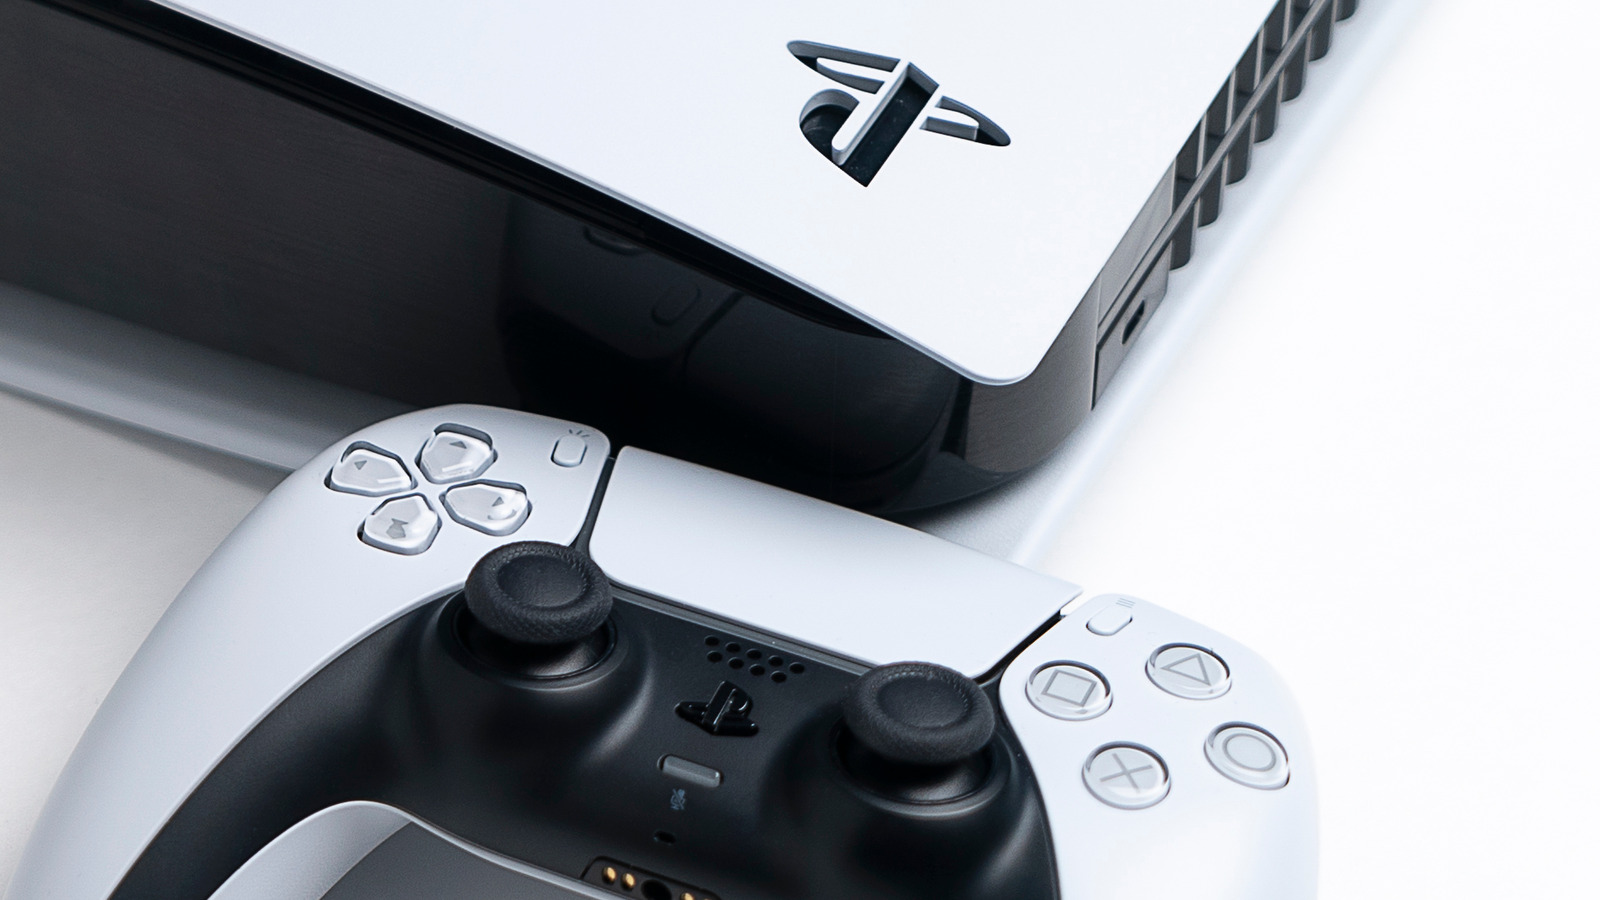 PS5 Pro specs could leak soon — here's why